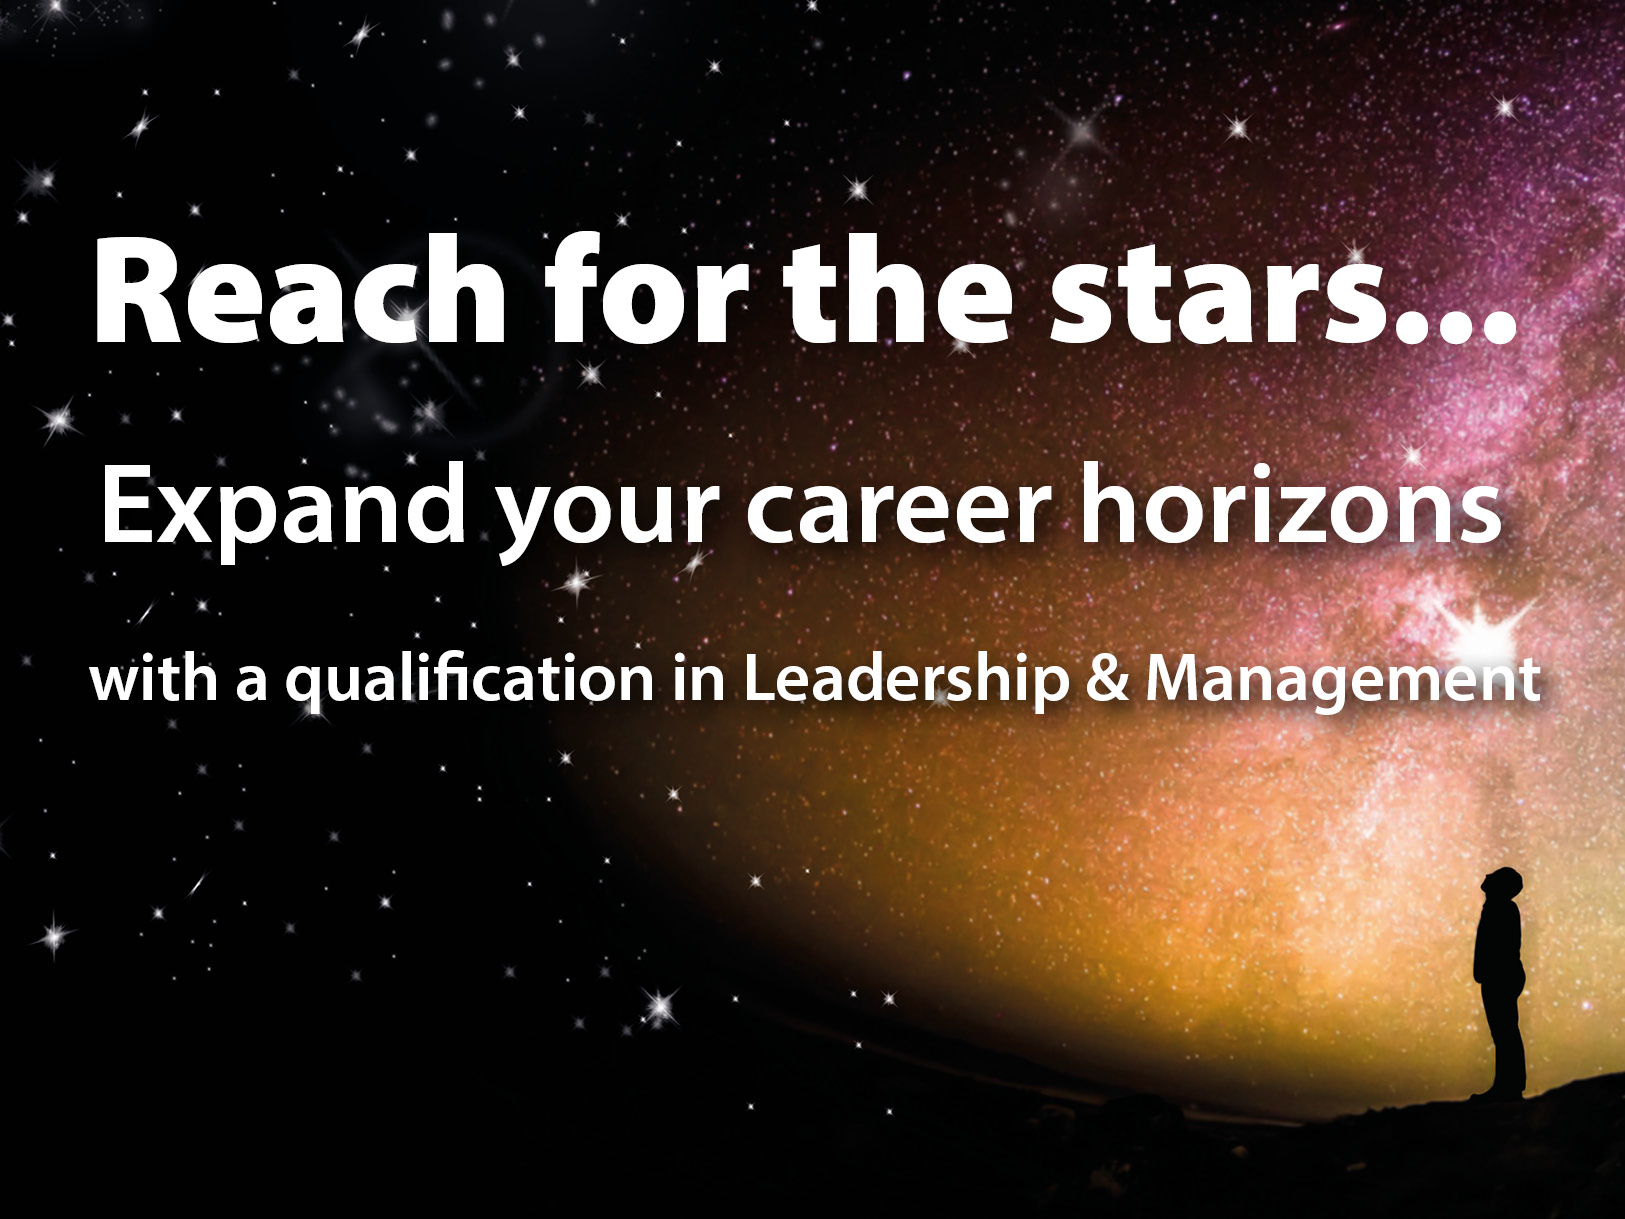 Expand your career horizons with a qualification in Leadership & Management